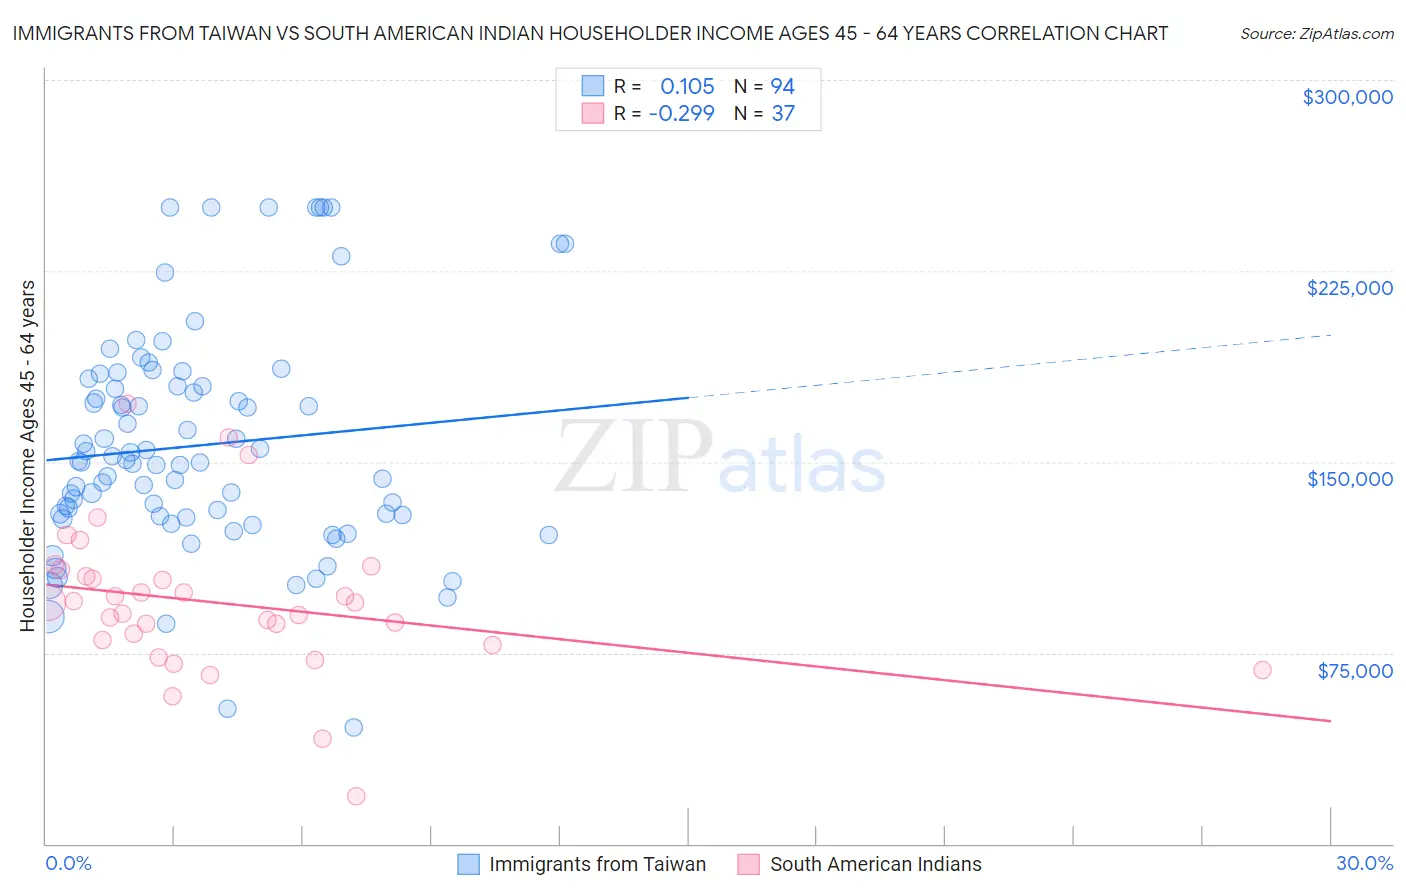 Immigrants from Taiwan vs South American Indian Householder Income Ages 45 - 64 years